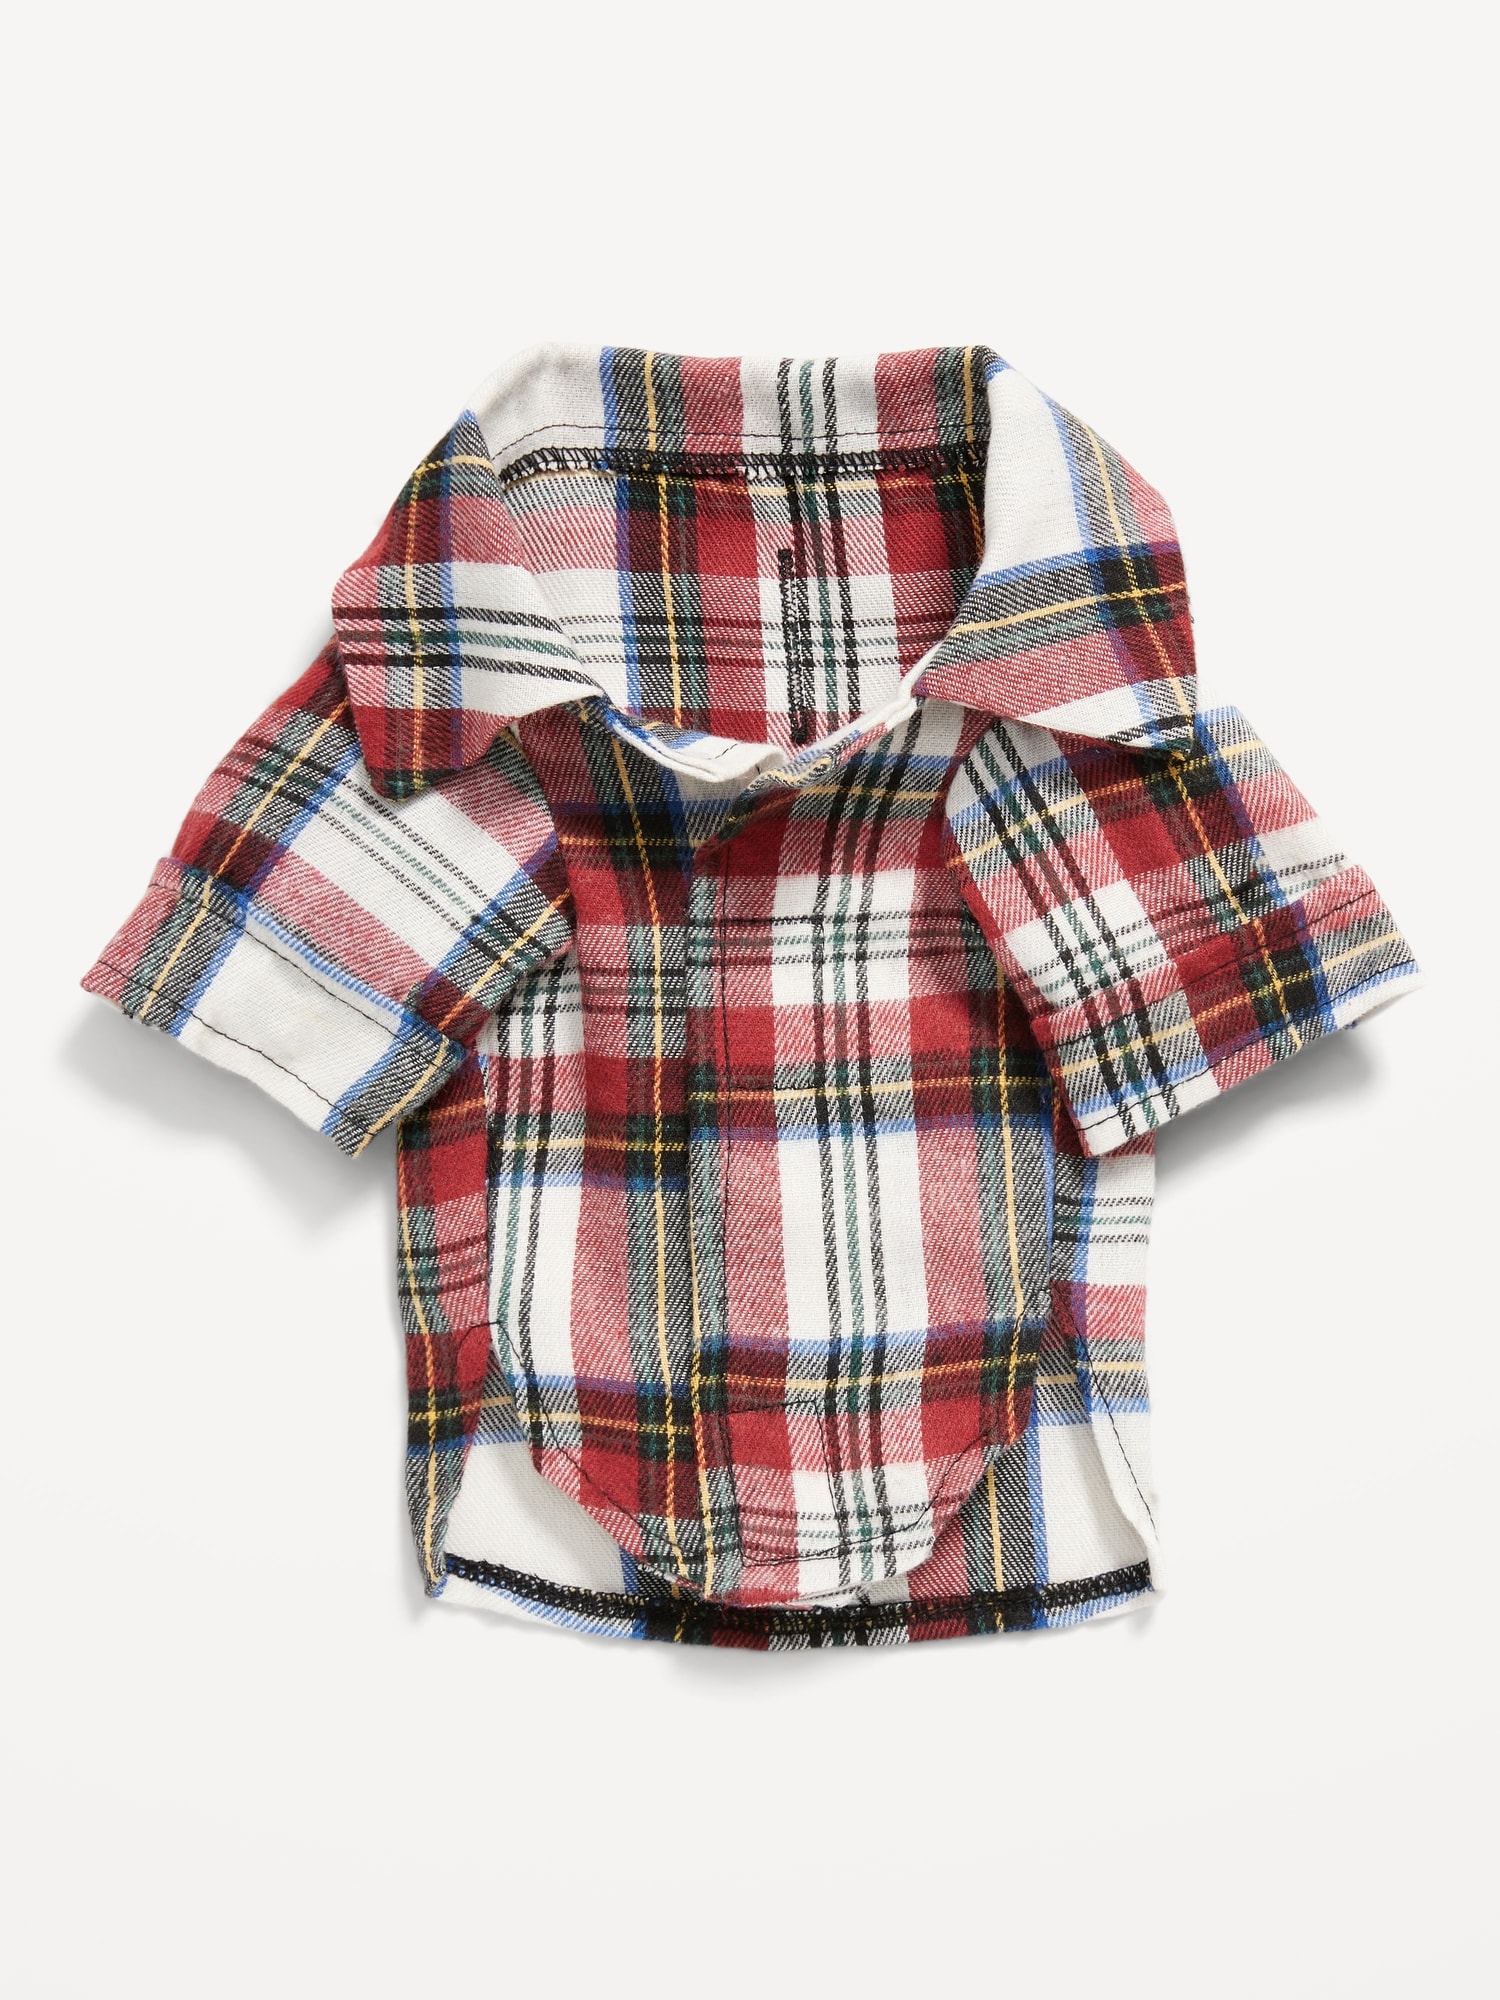 Matching Shirt for Pets | Old Navy